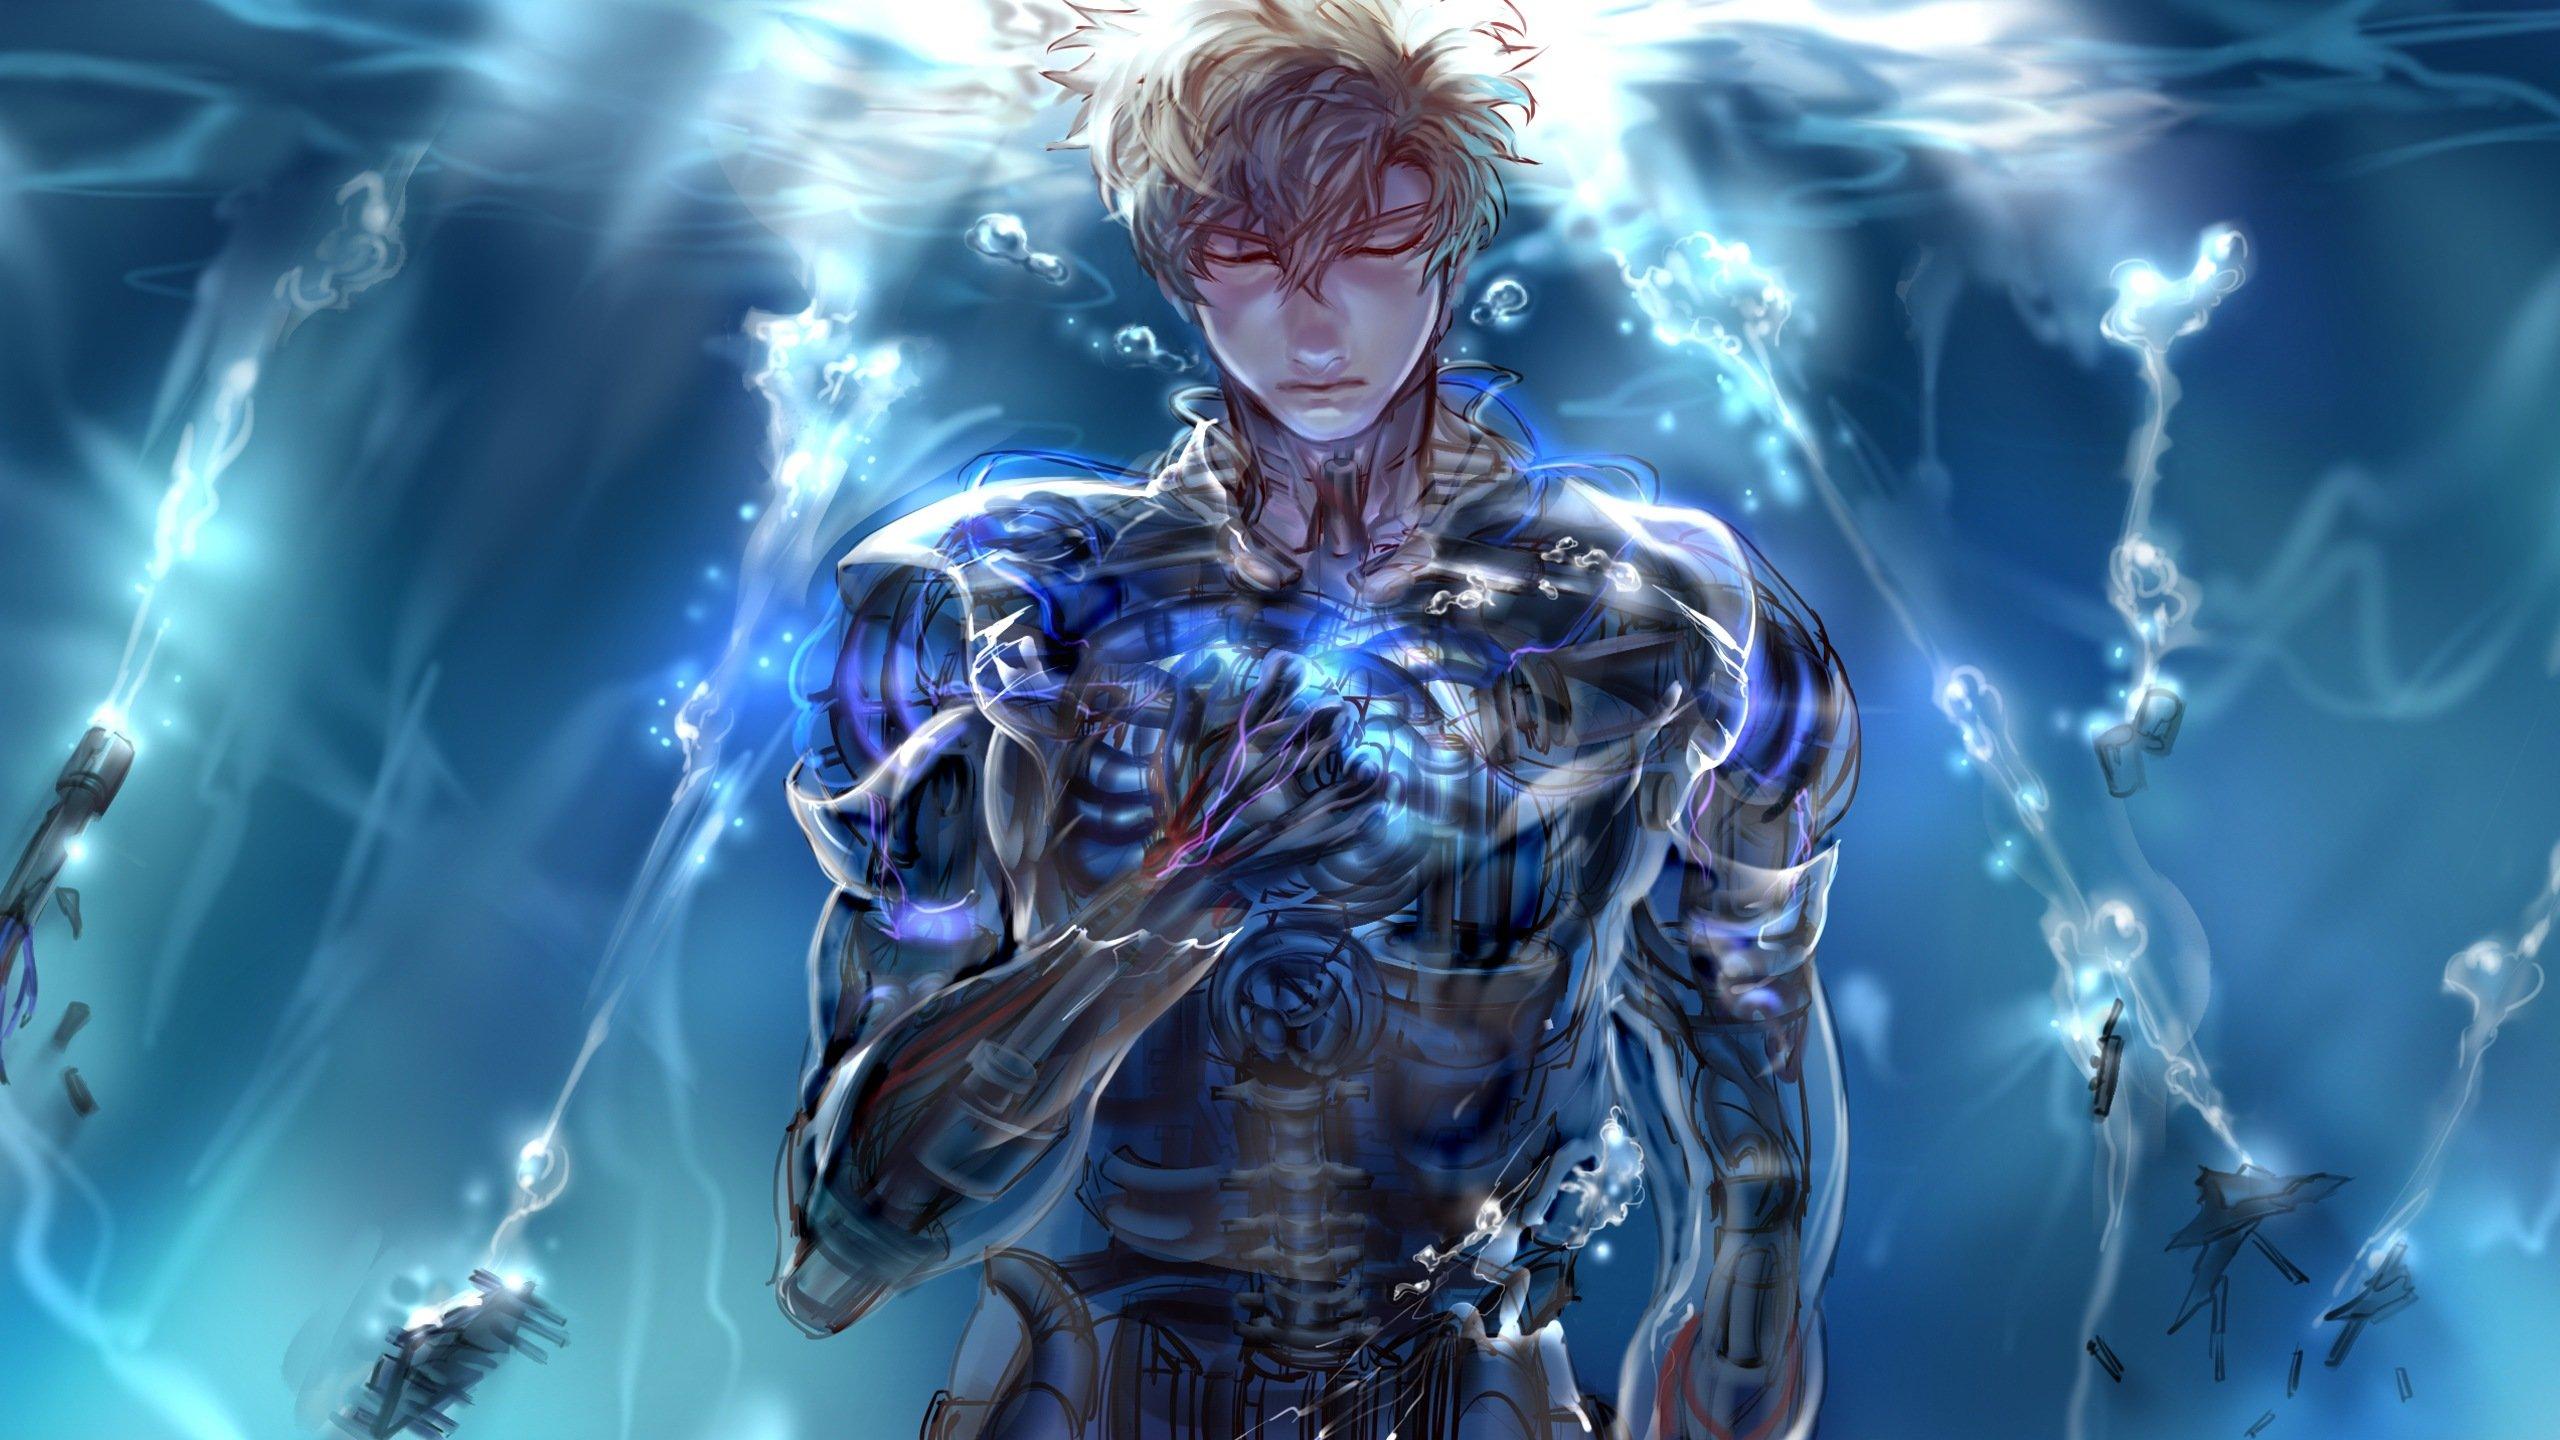 Awesome Genos (One Punch Man) Free Background For HD